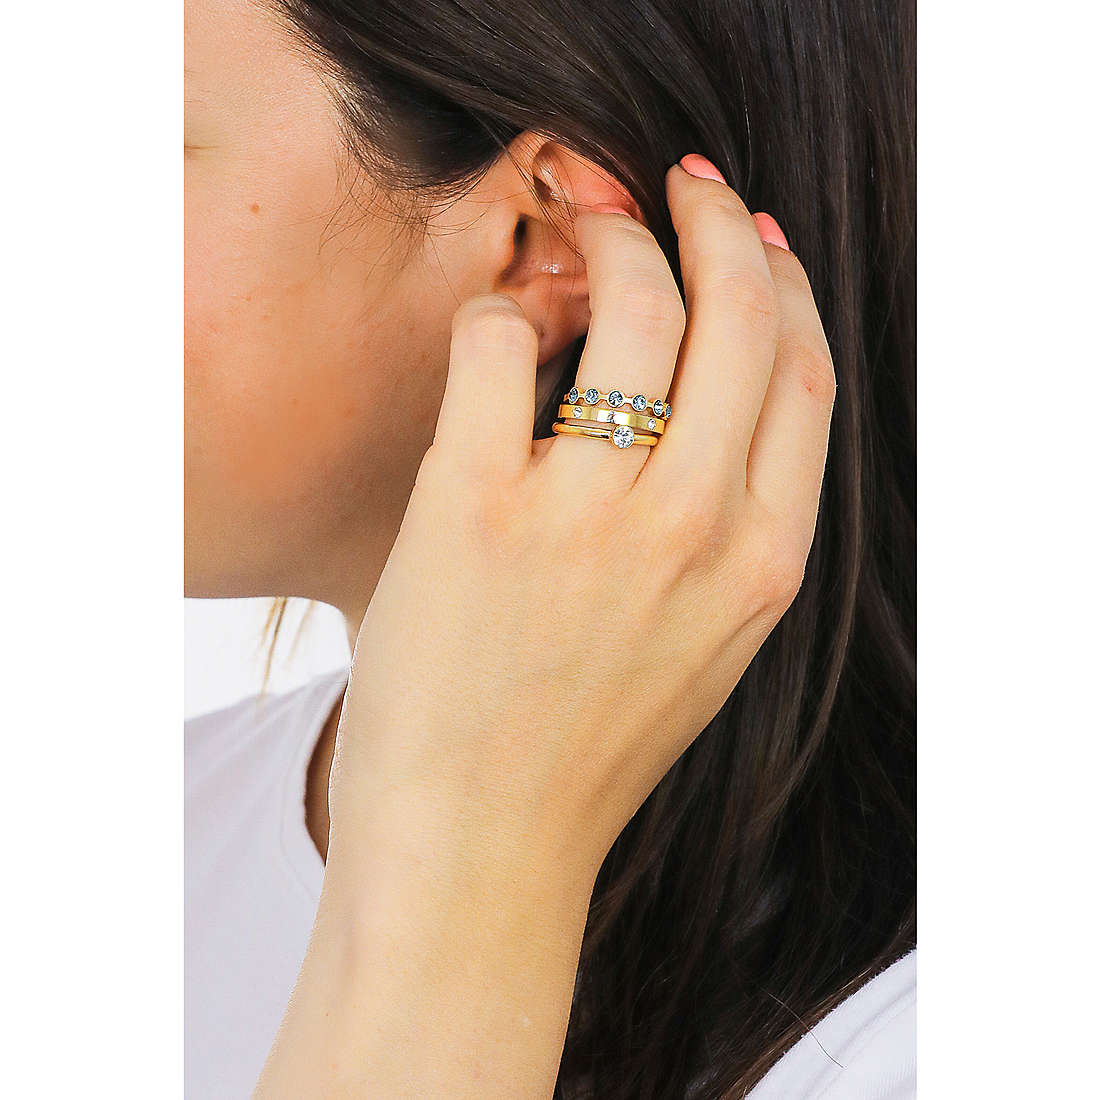 Brosway rings Symphonia woman BYM94A wearing